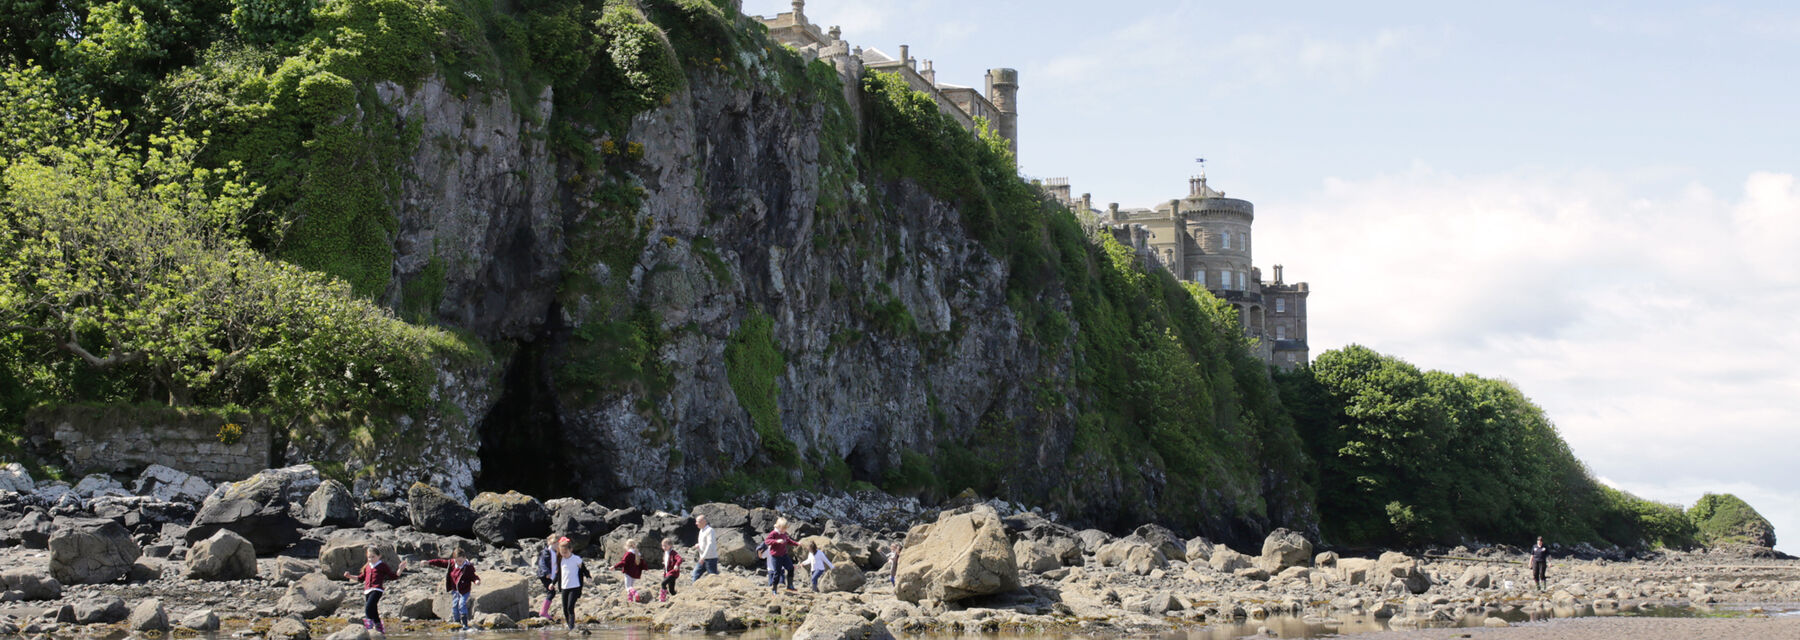 A view looking up a cliff to a grand castle on the top. Rock pools on the sandy beach are in the foreground. Boulders lie strewn on the beach beneath the cliff.